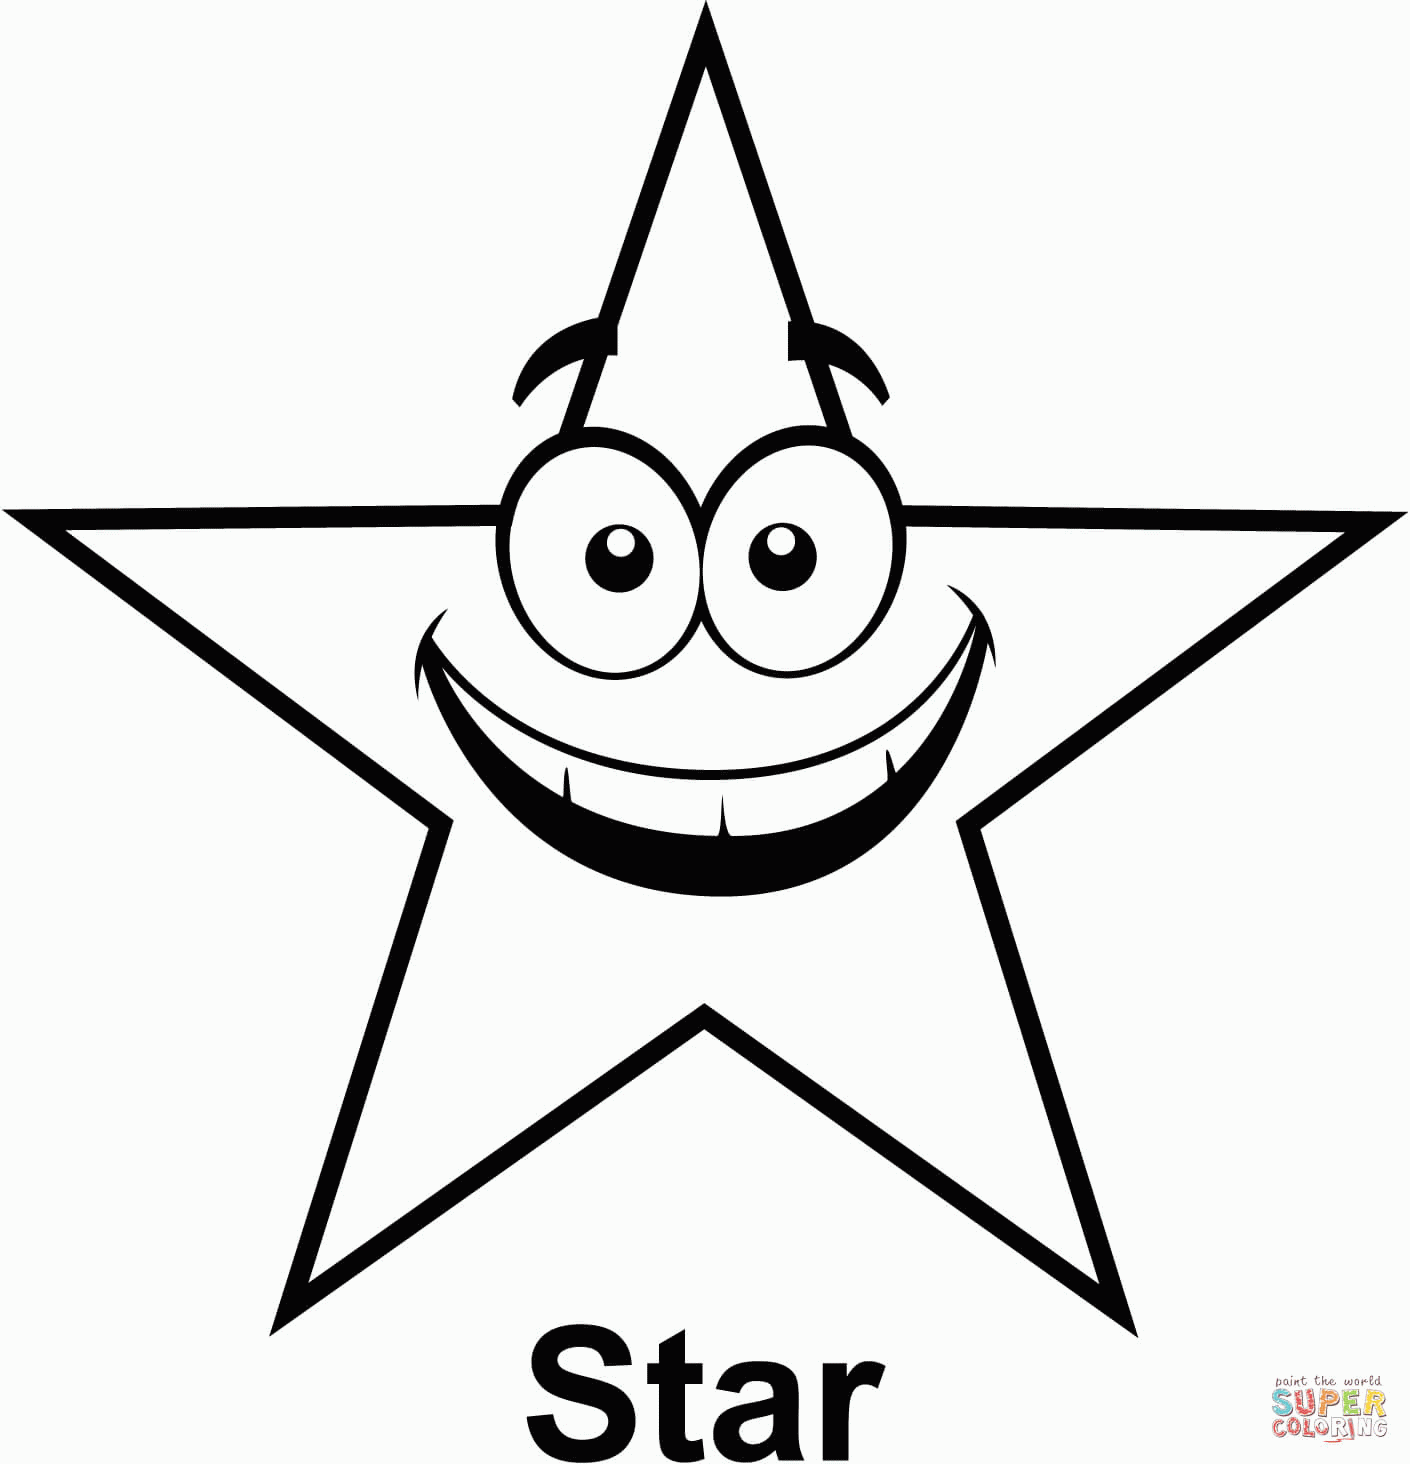 Five Point Star coloring page | Free Printable Coloring Pages